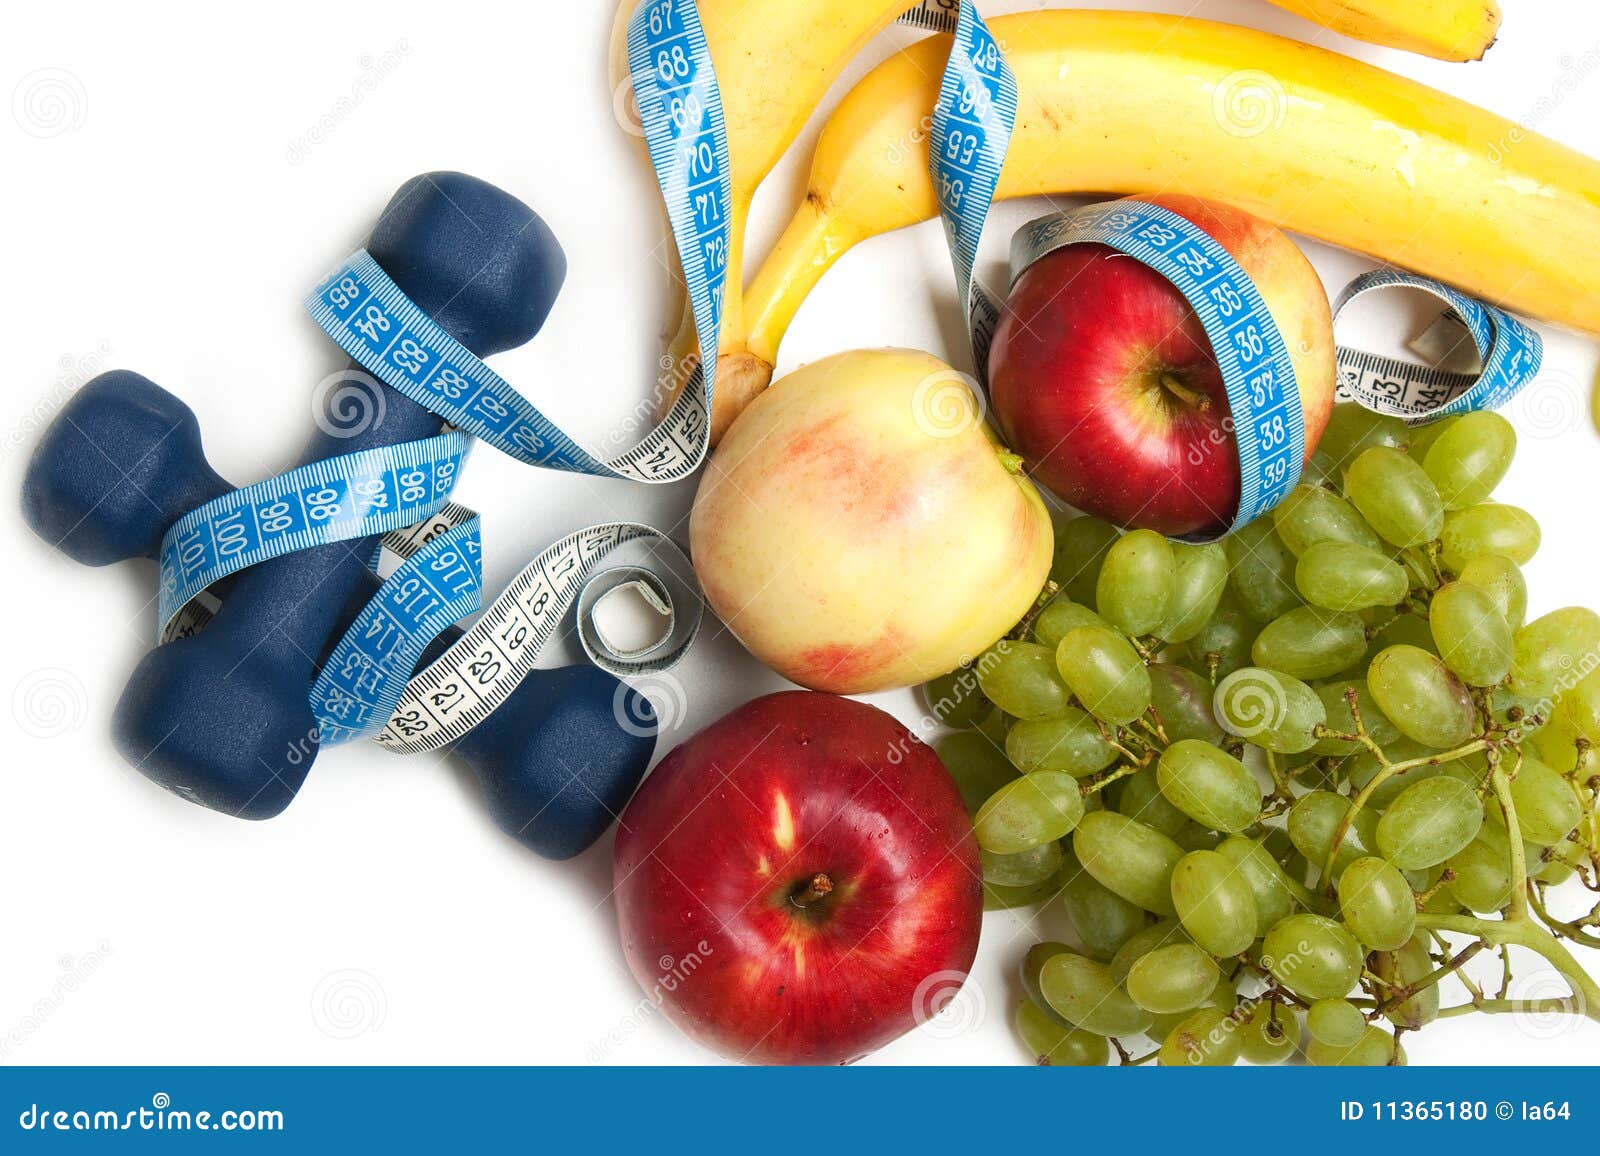 Healthy lifestyle - fruit food, sport exercising.